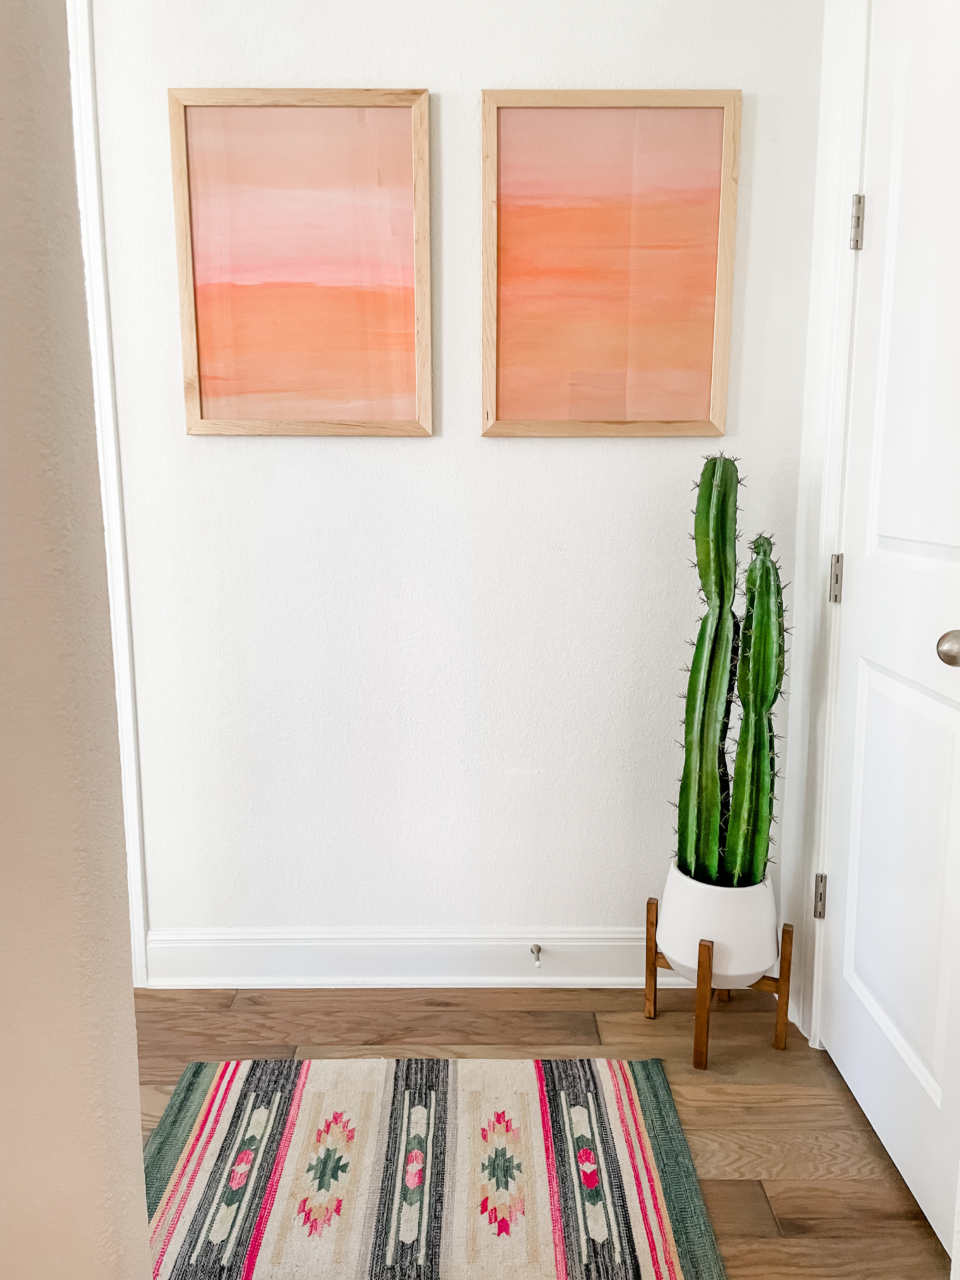 Southwestern decor with cactus and framed art prints.